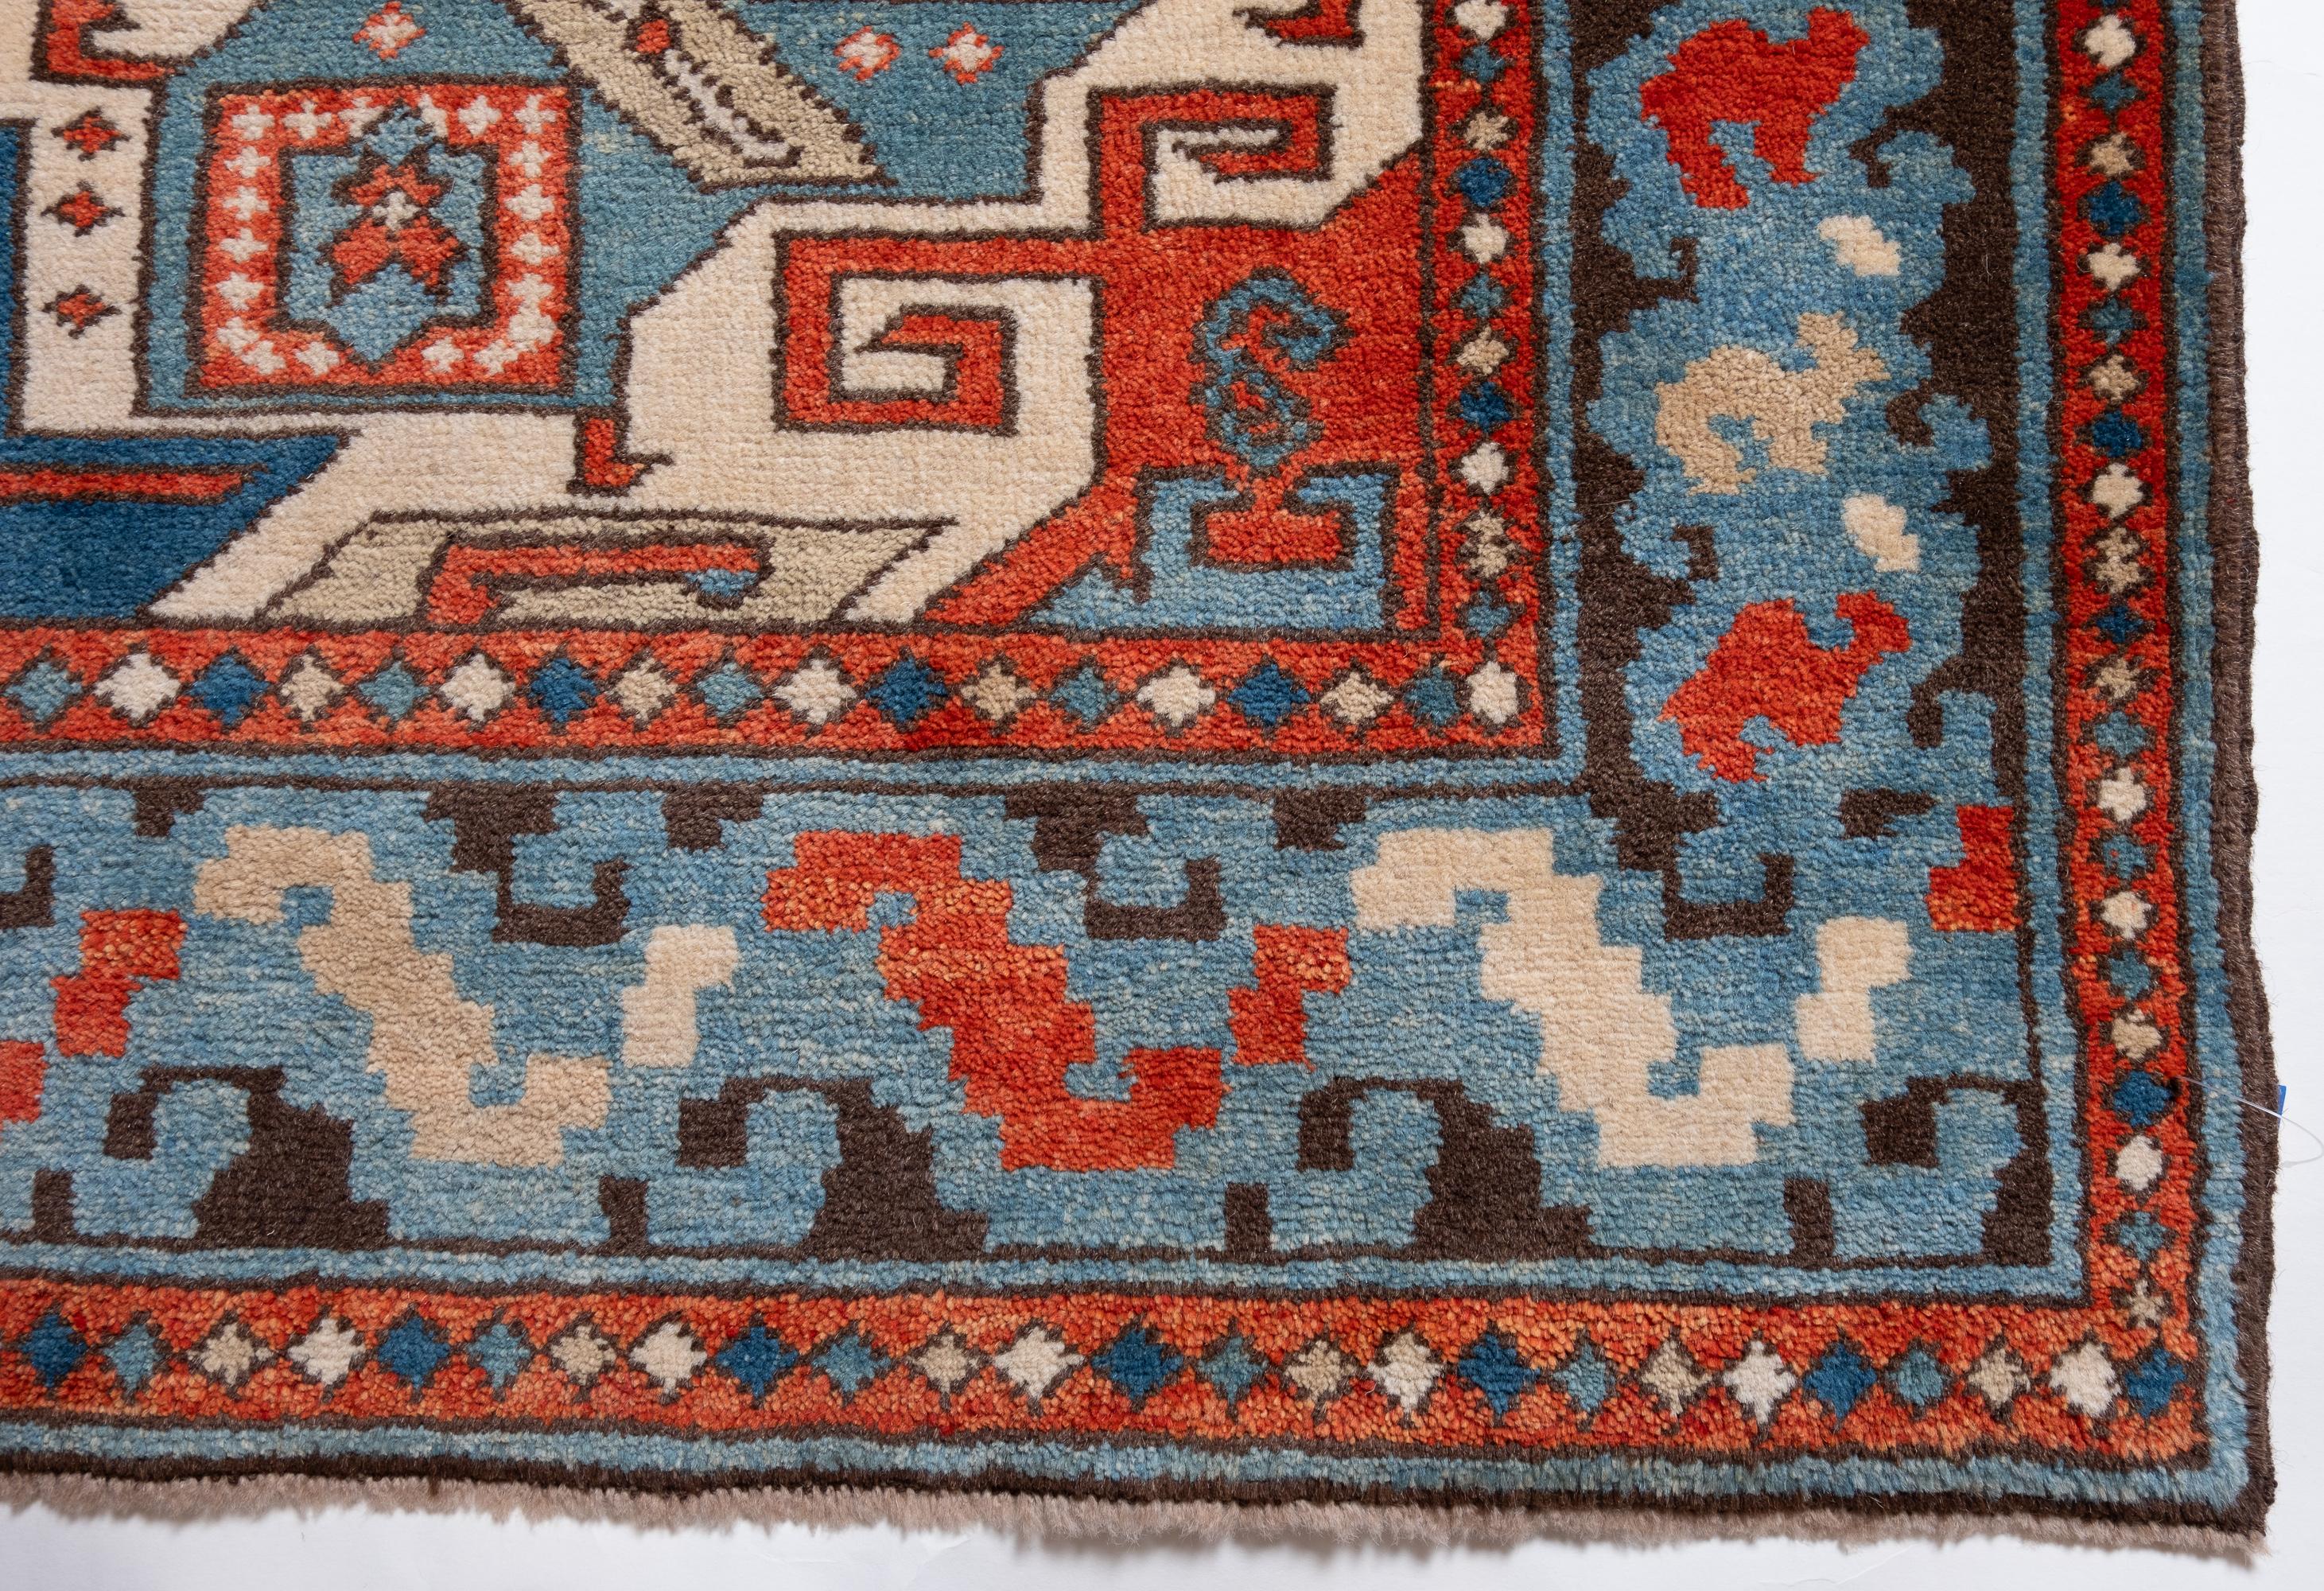 The source of the rug comes from the book Orient Star – A Carpet Collection, E. Heinrich Kirchheim, Hali Publications Ltd, 1993 nr.2. This is the best-known example of a Star Kazaks rug from the Mid 19th century from the Central Caucasus area. Star